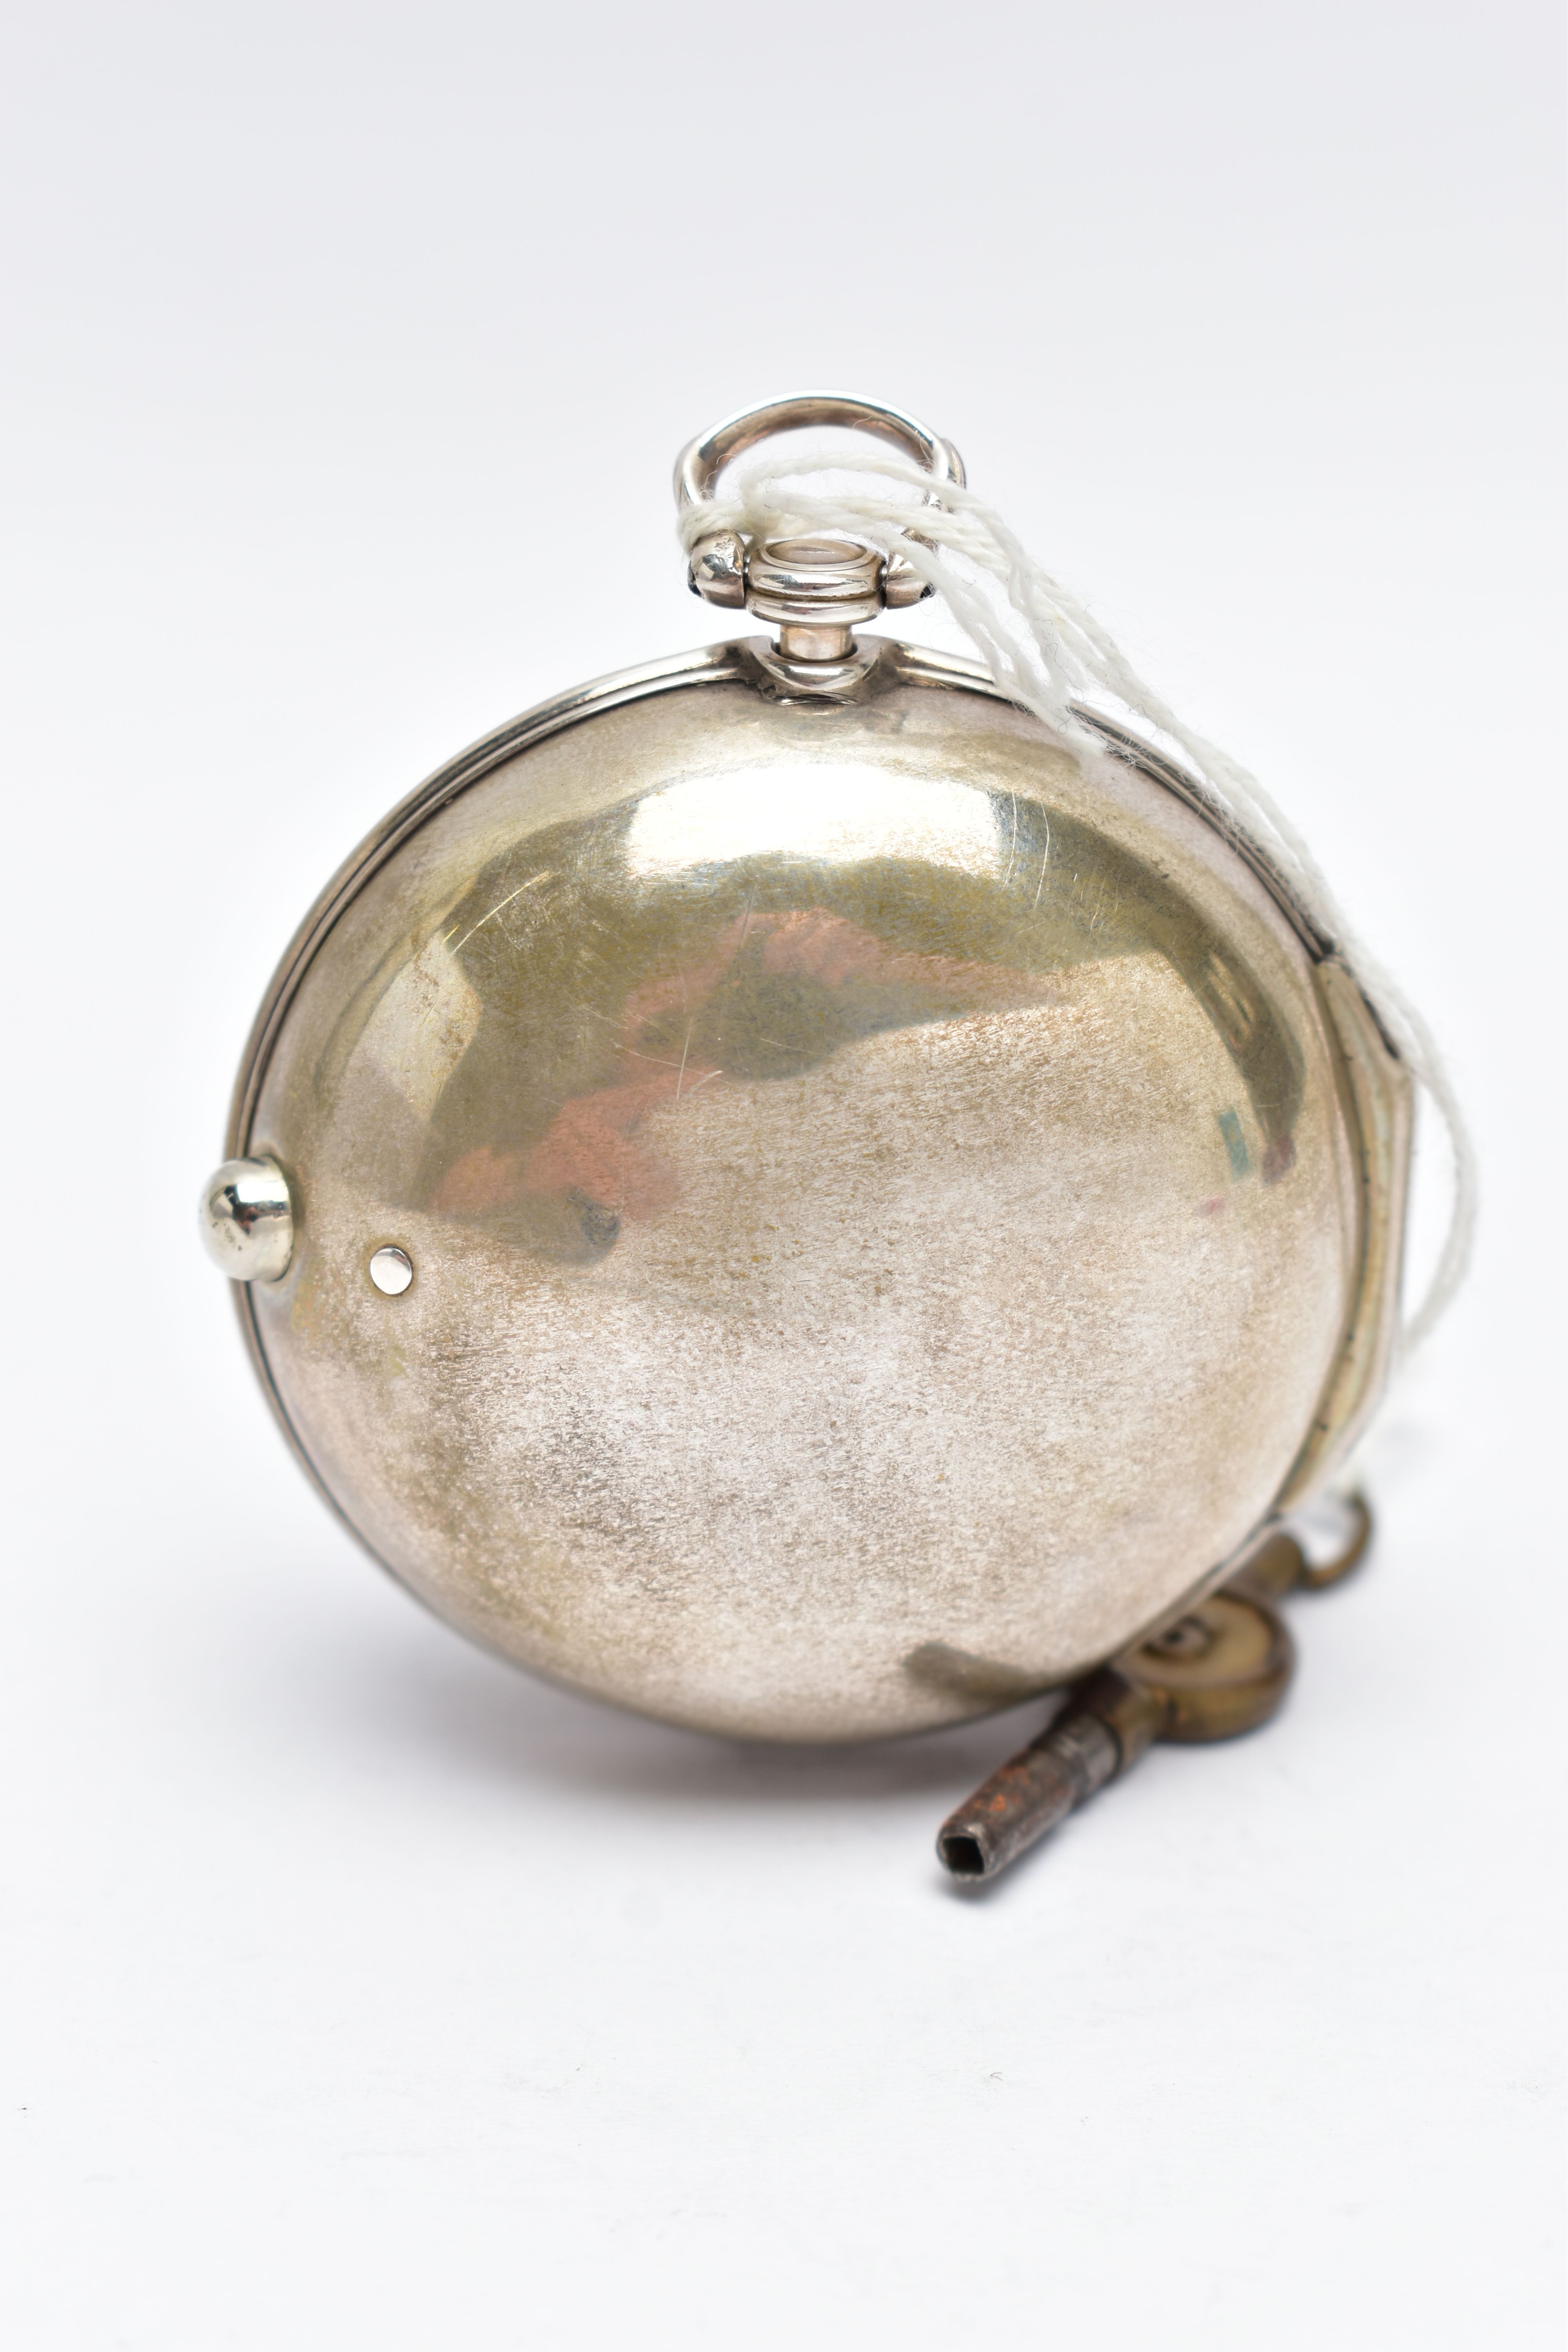 A GEORGE II SILVER PAIR CASED VERGE POCKET WATCH BY 'THOMAS BECKETT', key wound, round champleve - Image 2 of 11